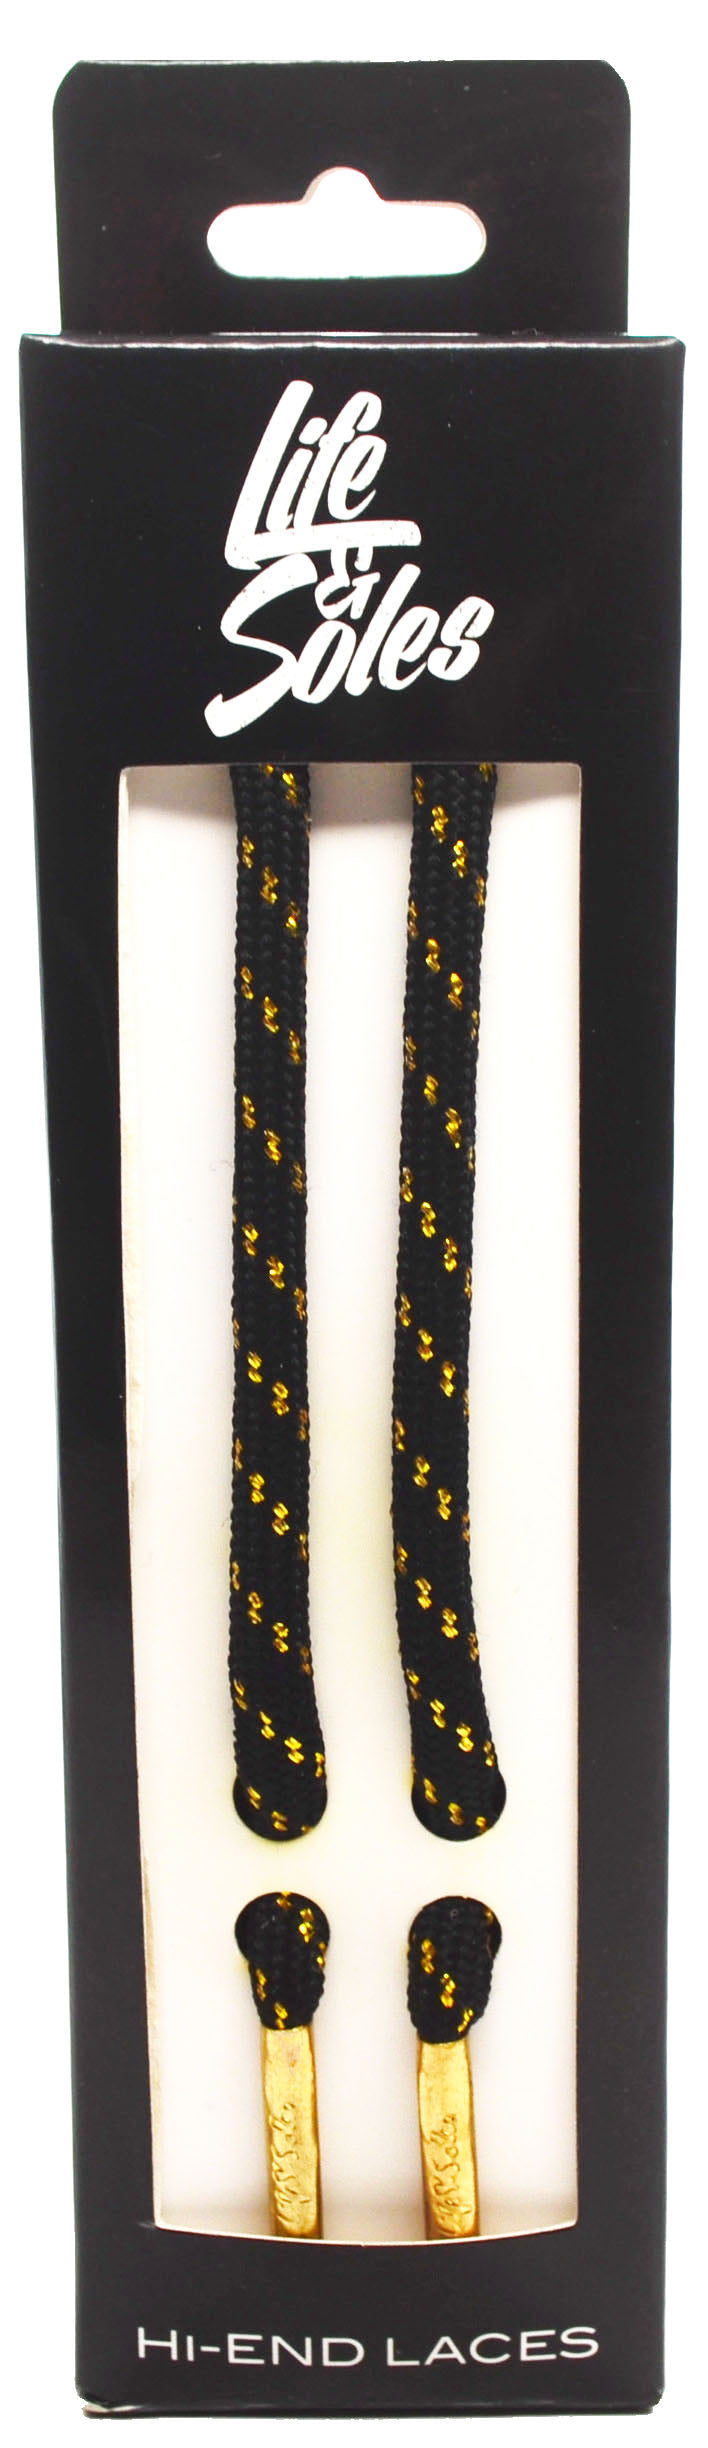 Black & Gold Threaded Rope Shoelaces